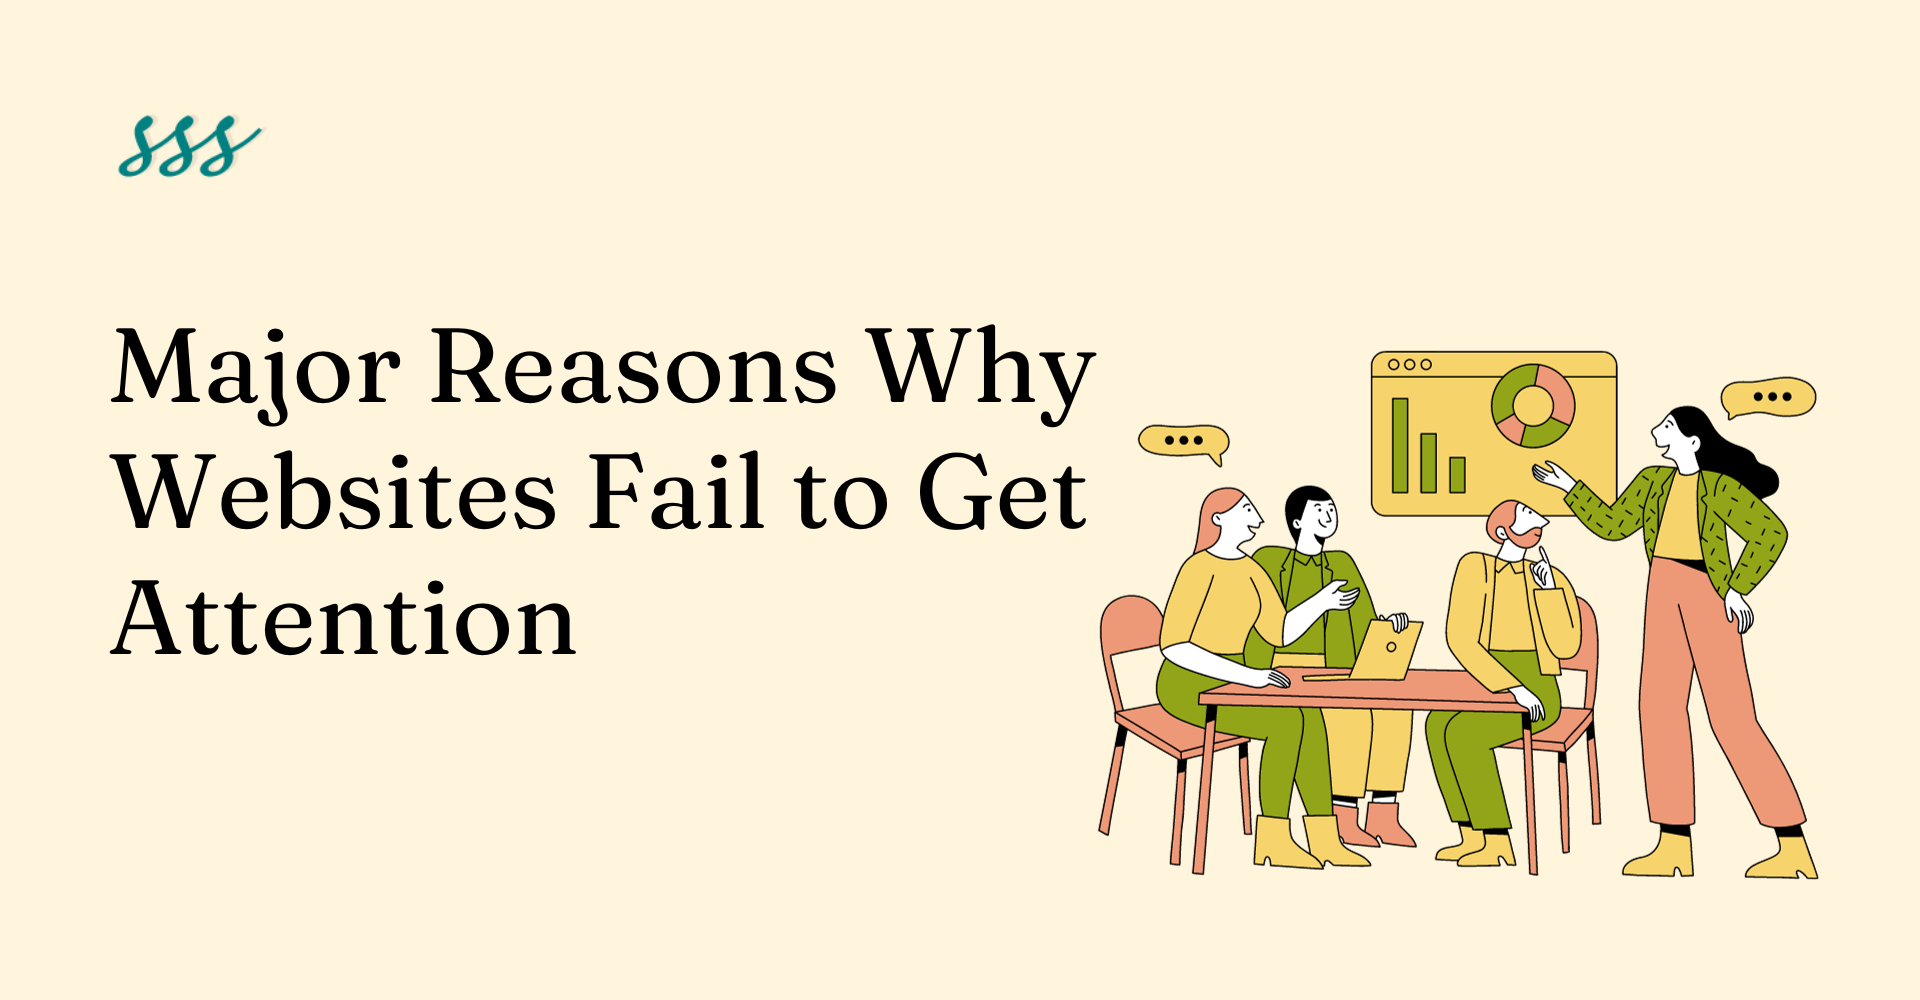 Reasons Why Websites Fail to Get Attention